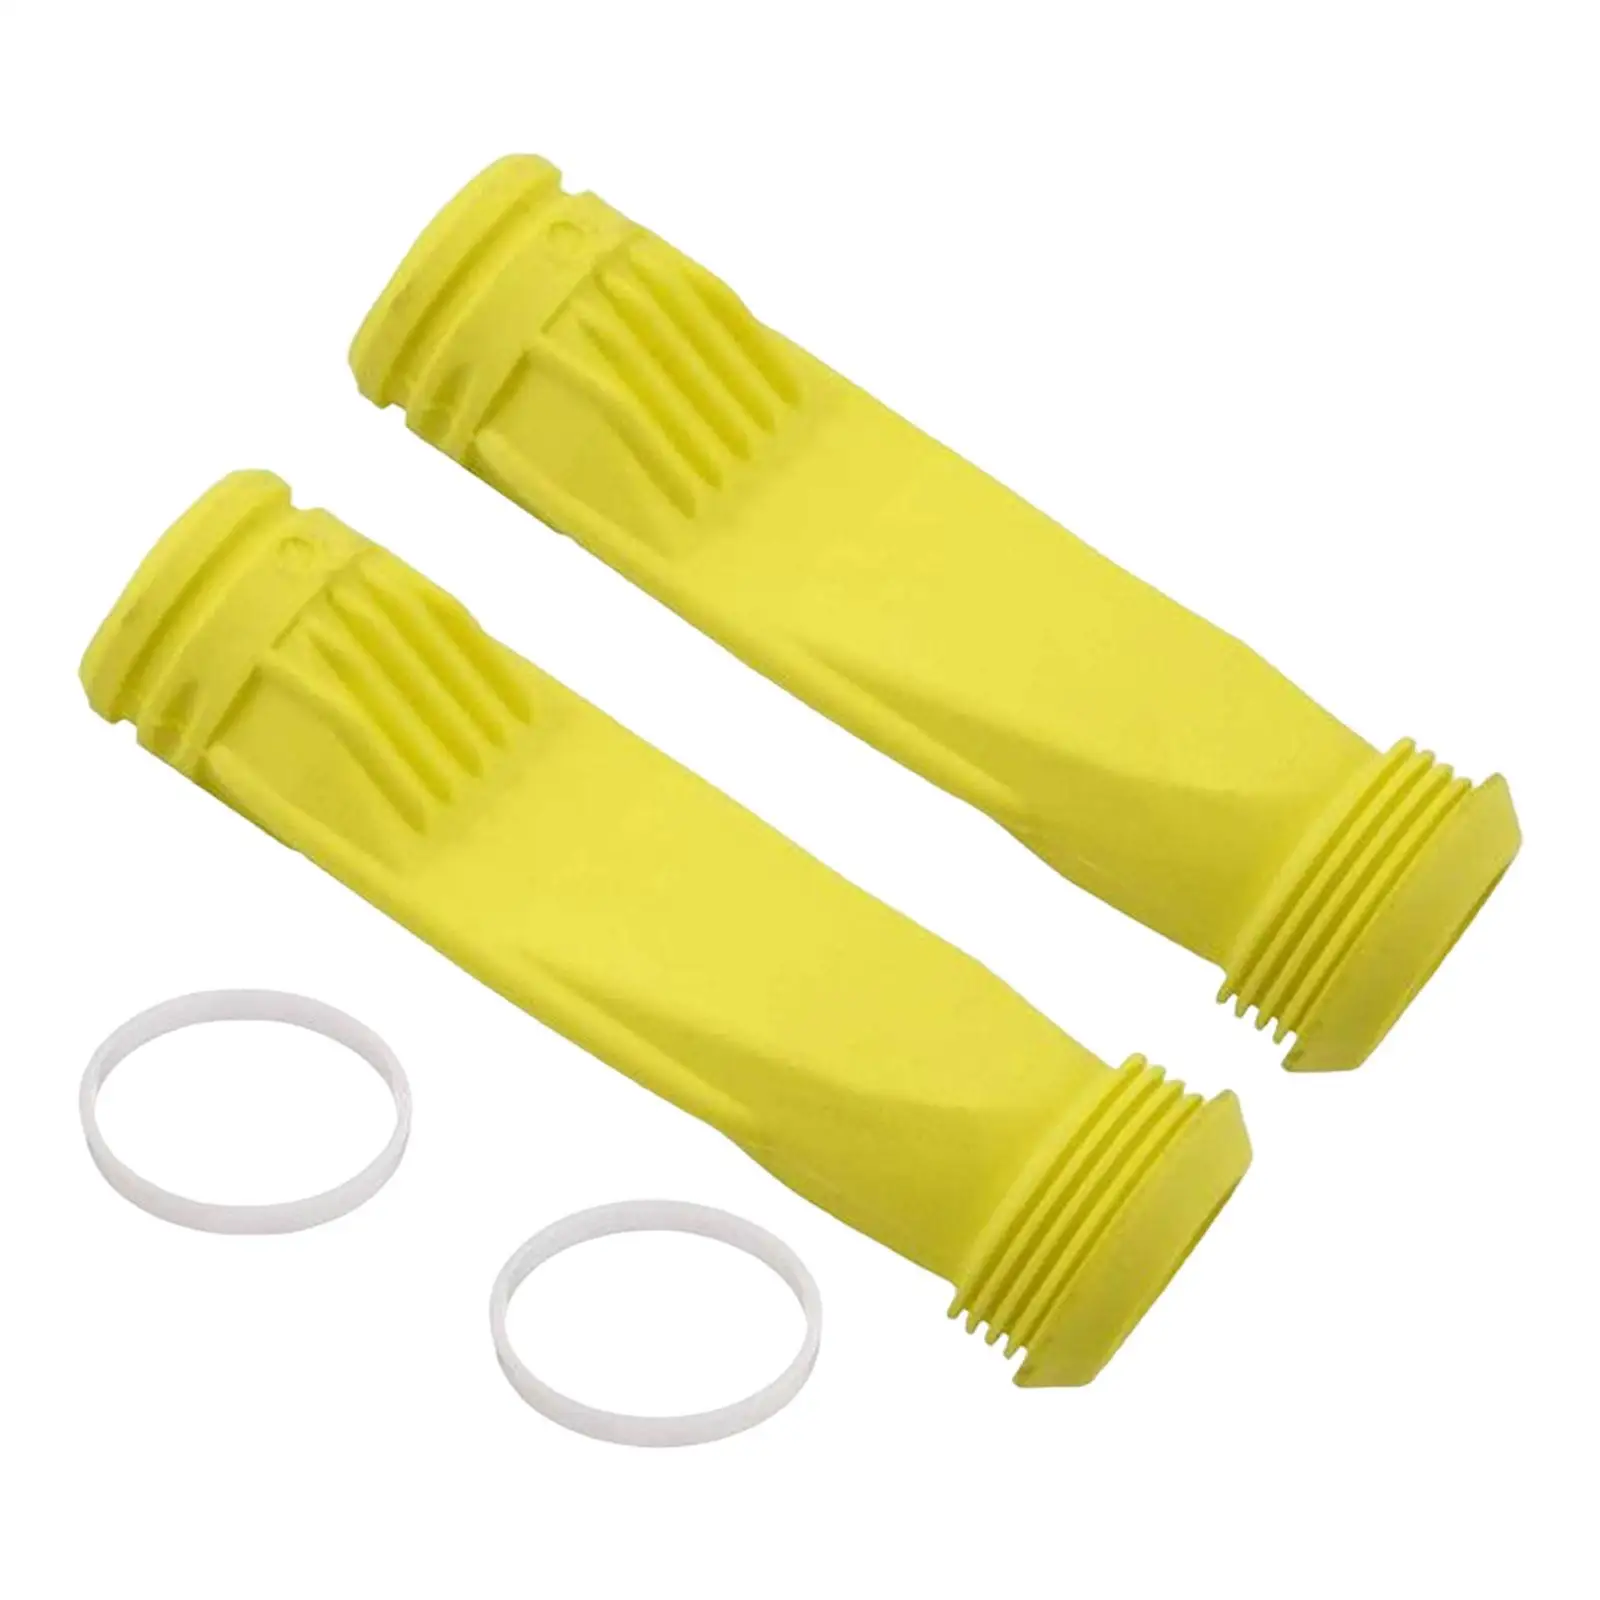 2x Pool Cleaner Diaphragm Long Life Replaces Accessories with